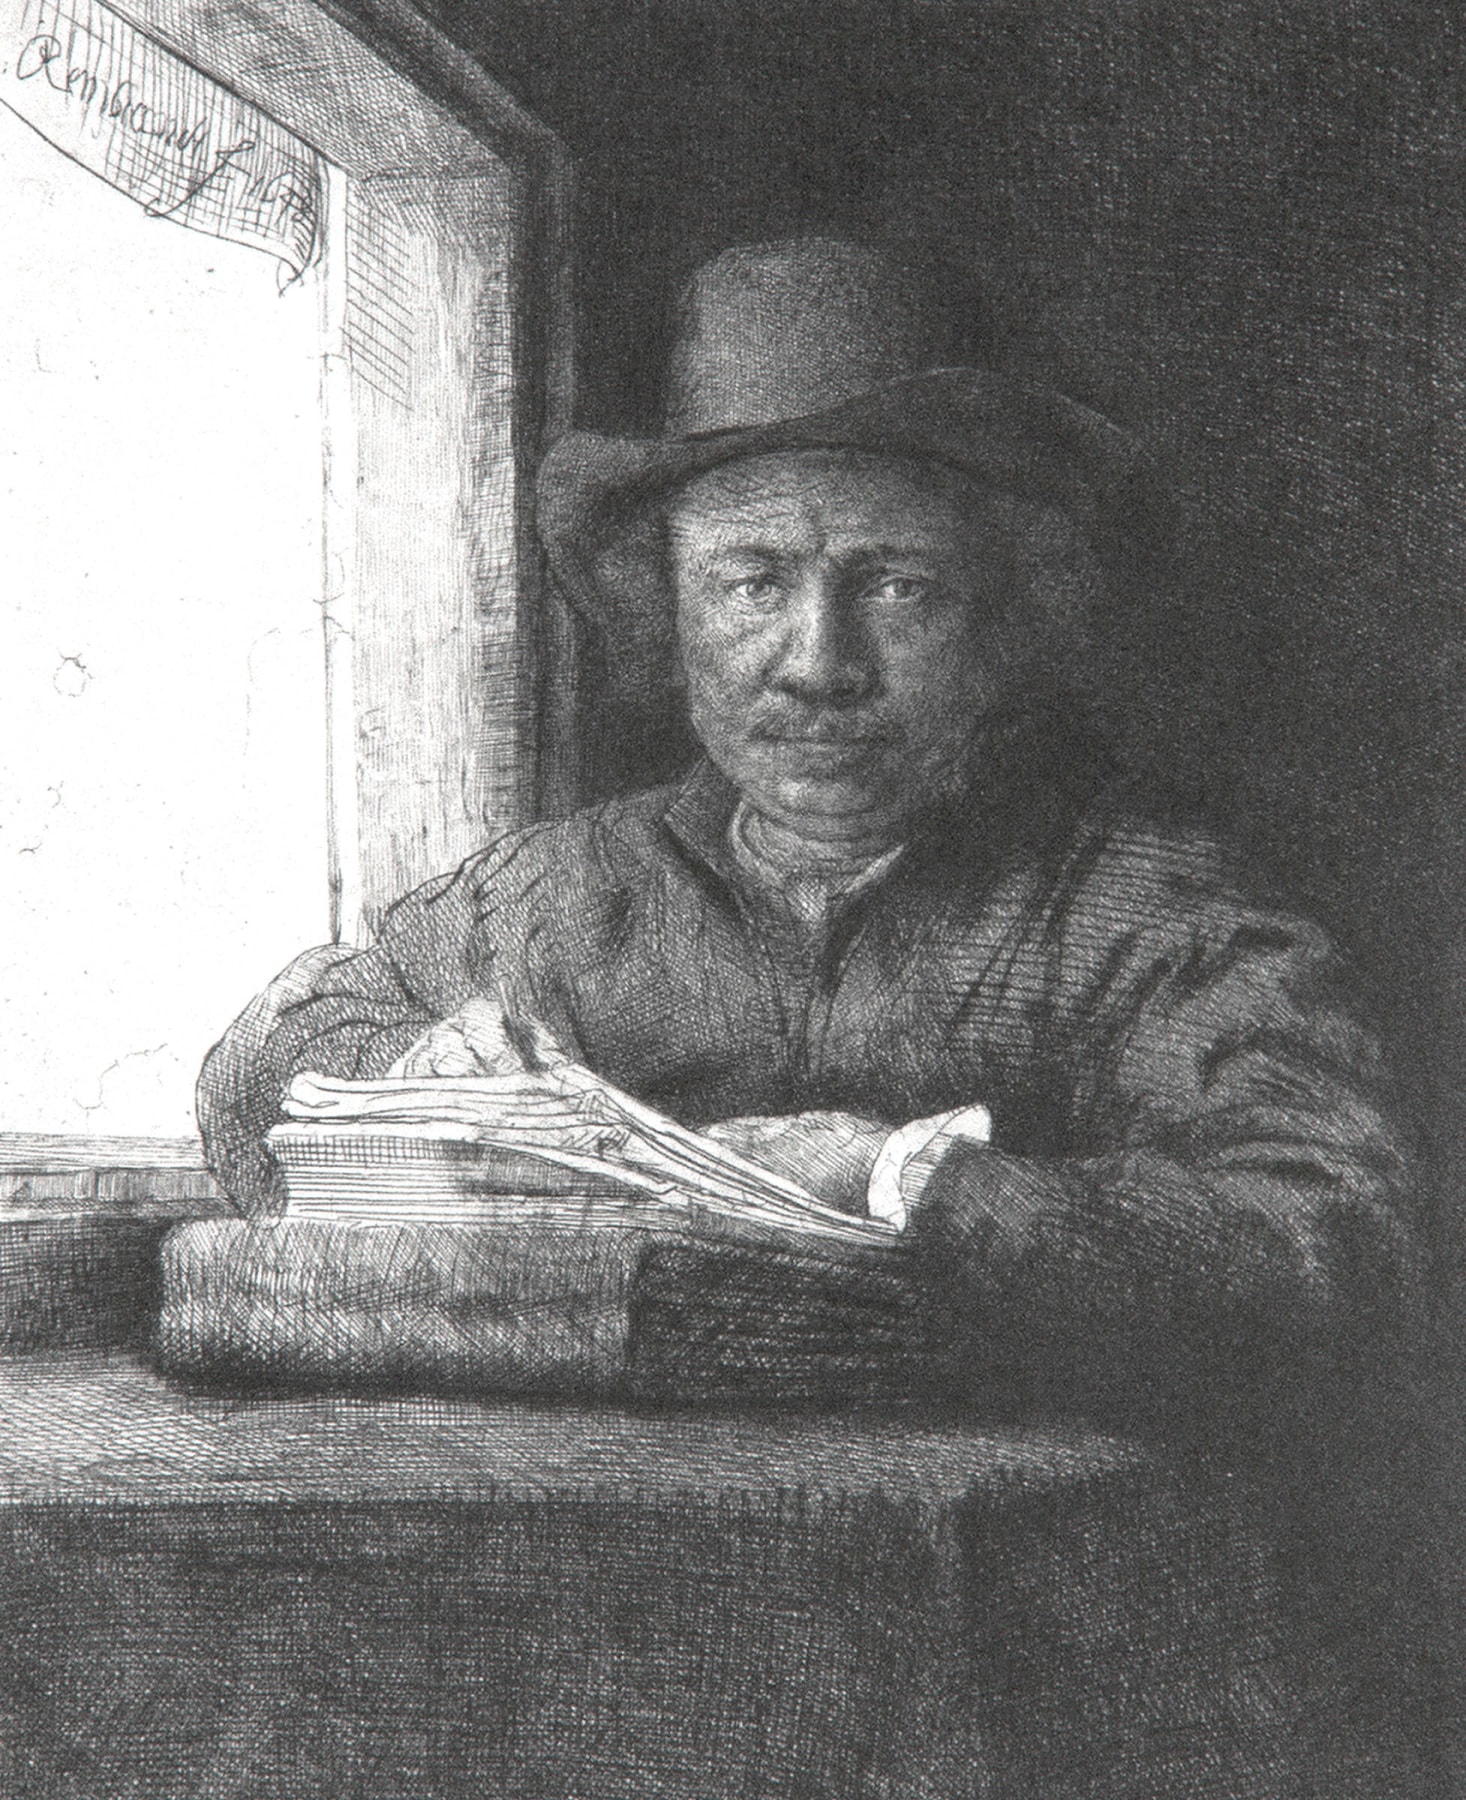 Rembrandt - Self-Portrait Drawing at a Window